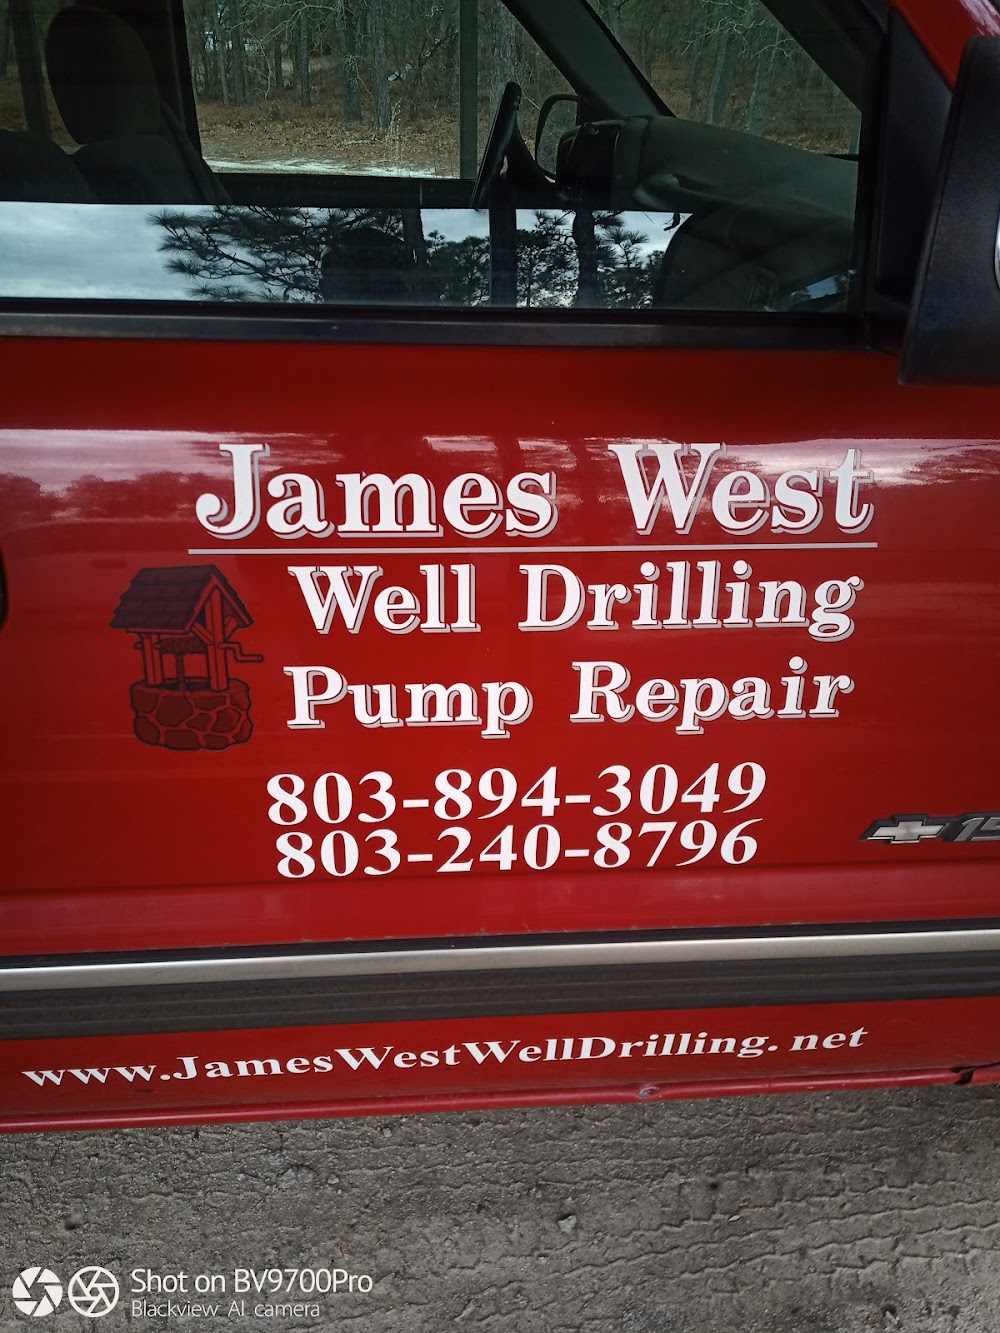 James West Well Drilling and Pump Repair